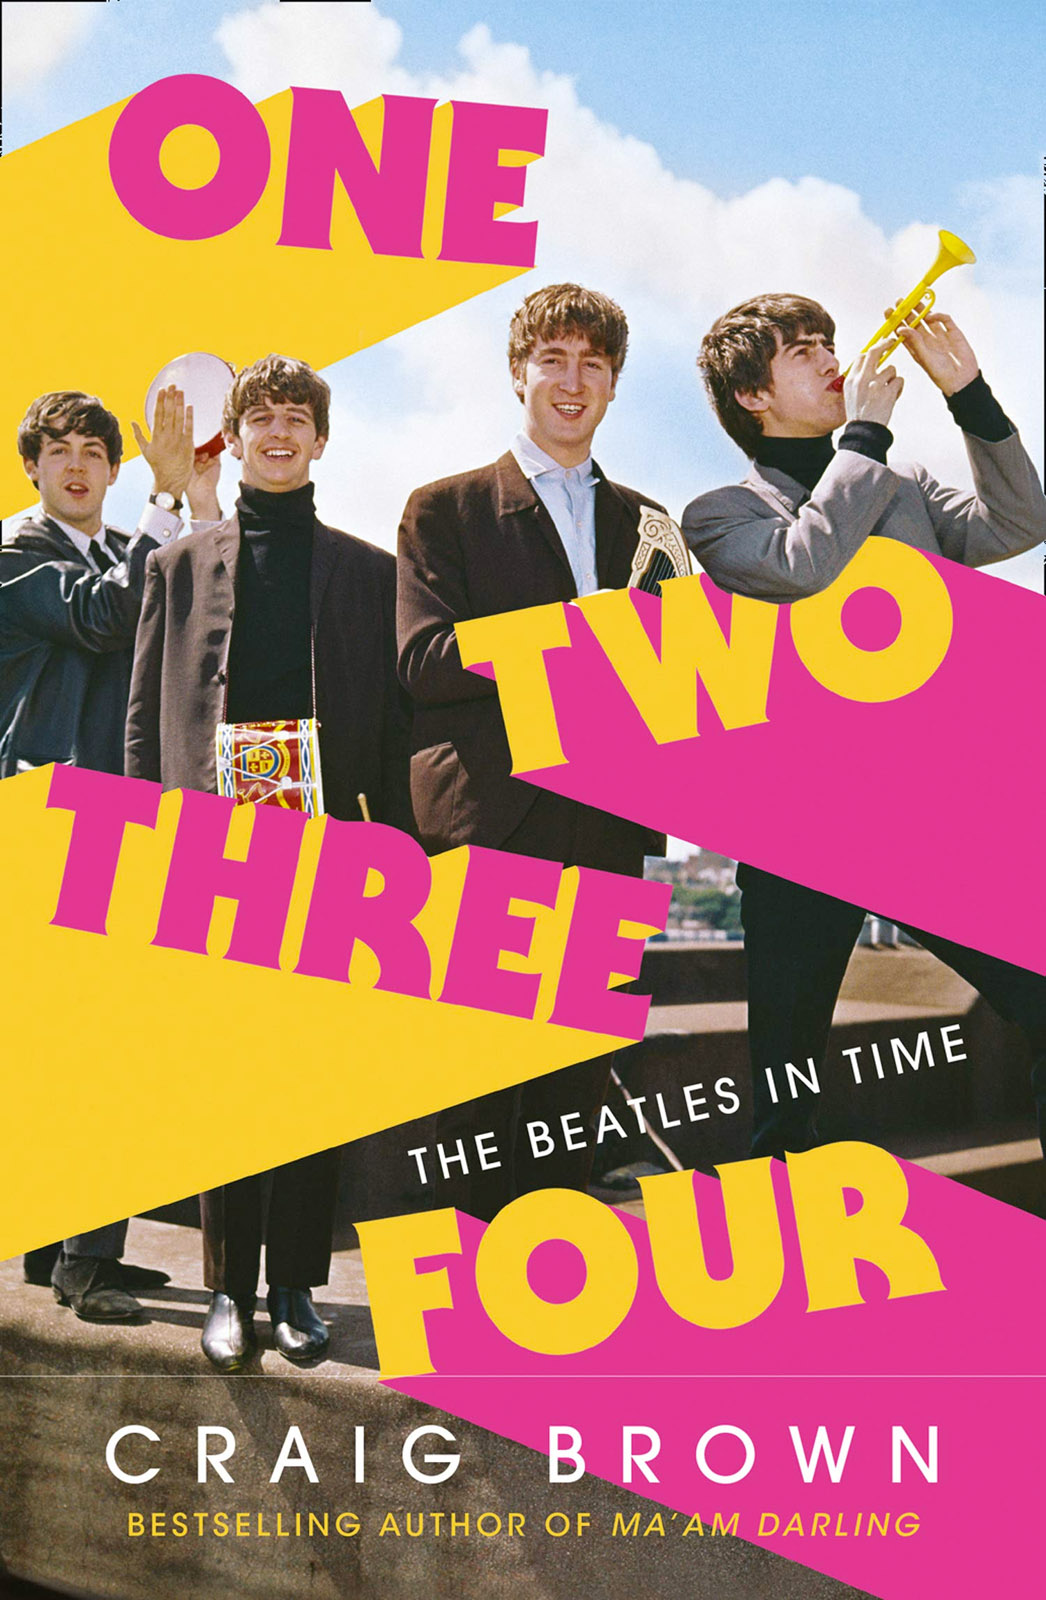 Cover: One two three four, the Beatles in time